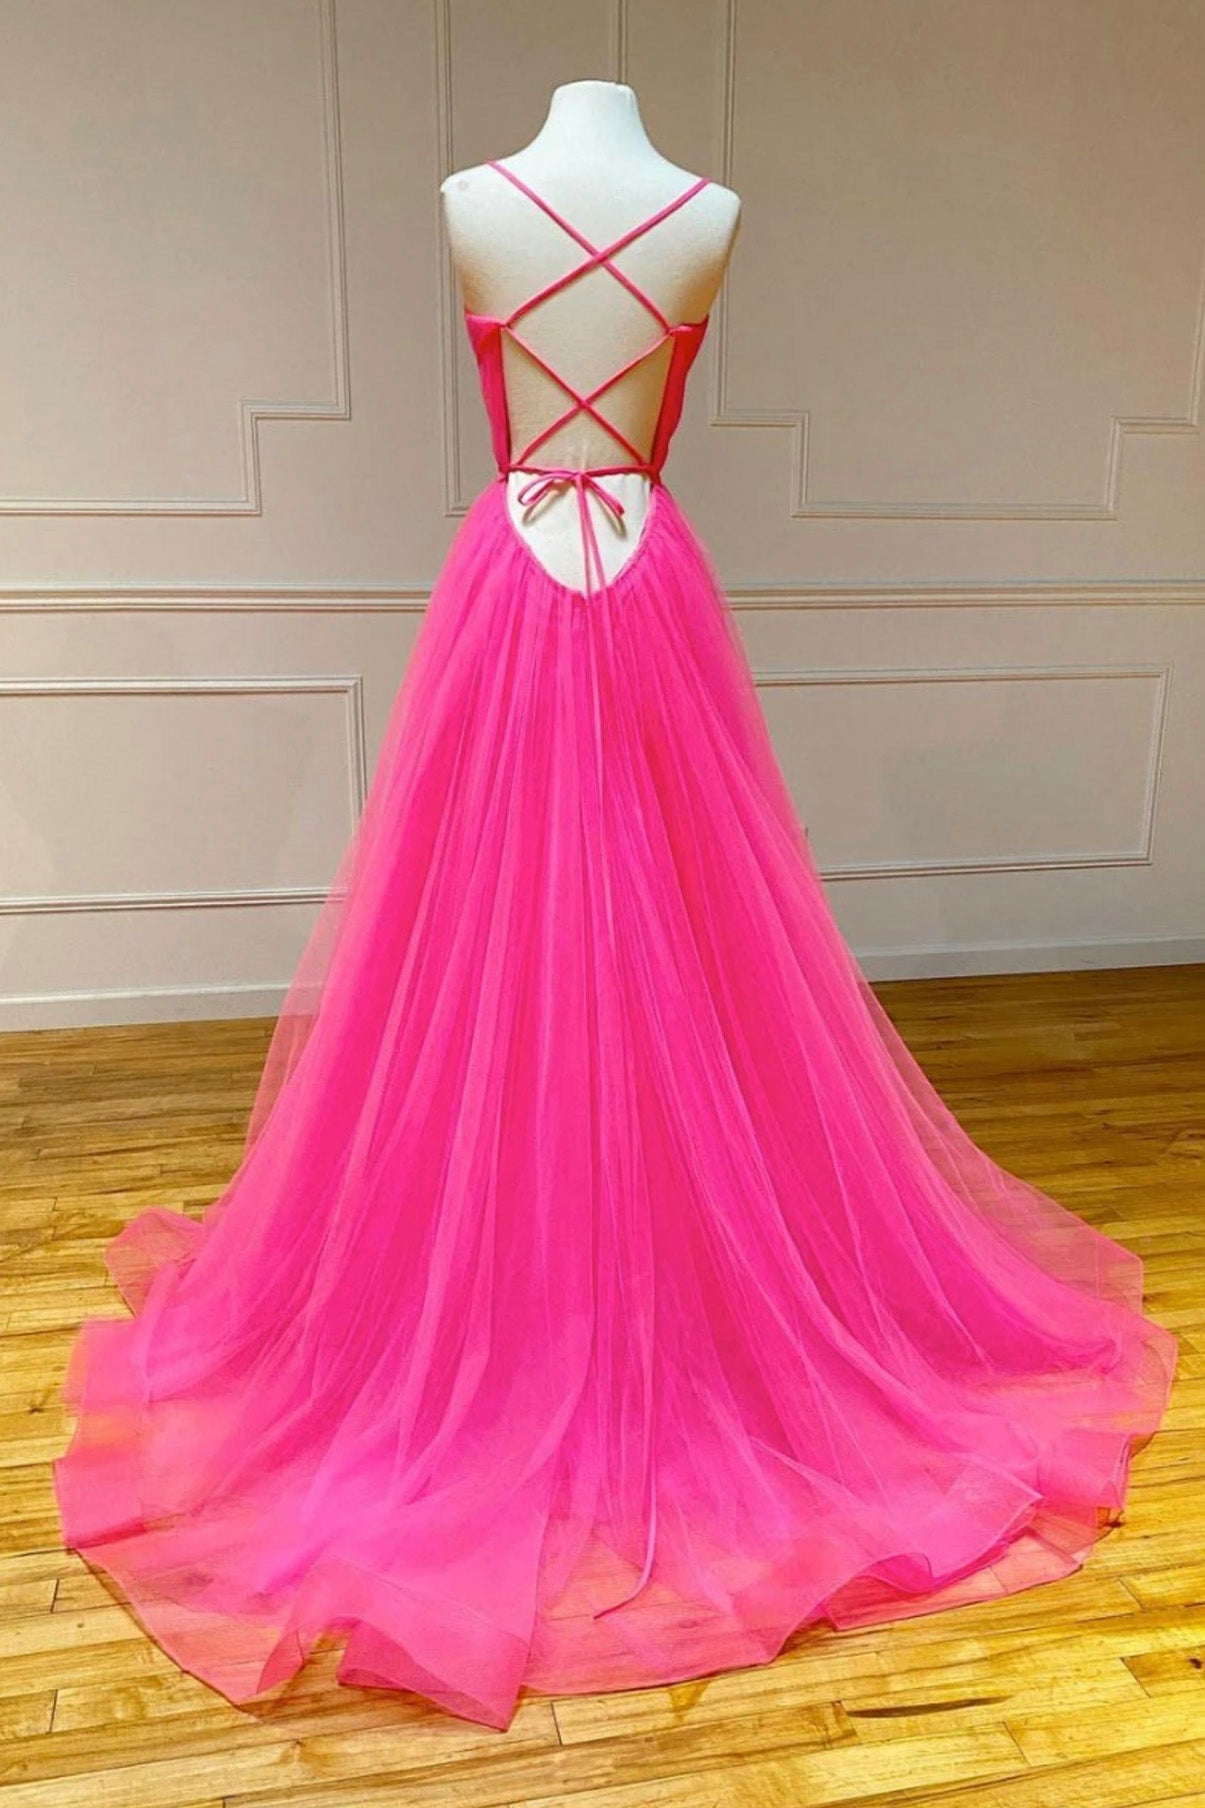 Hot Pink Tulle Long Prom Dress, Beautiful A-Line Backless Evening Dress